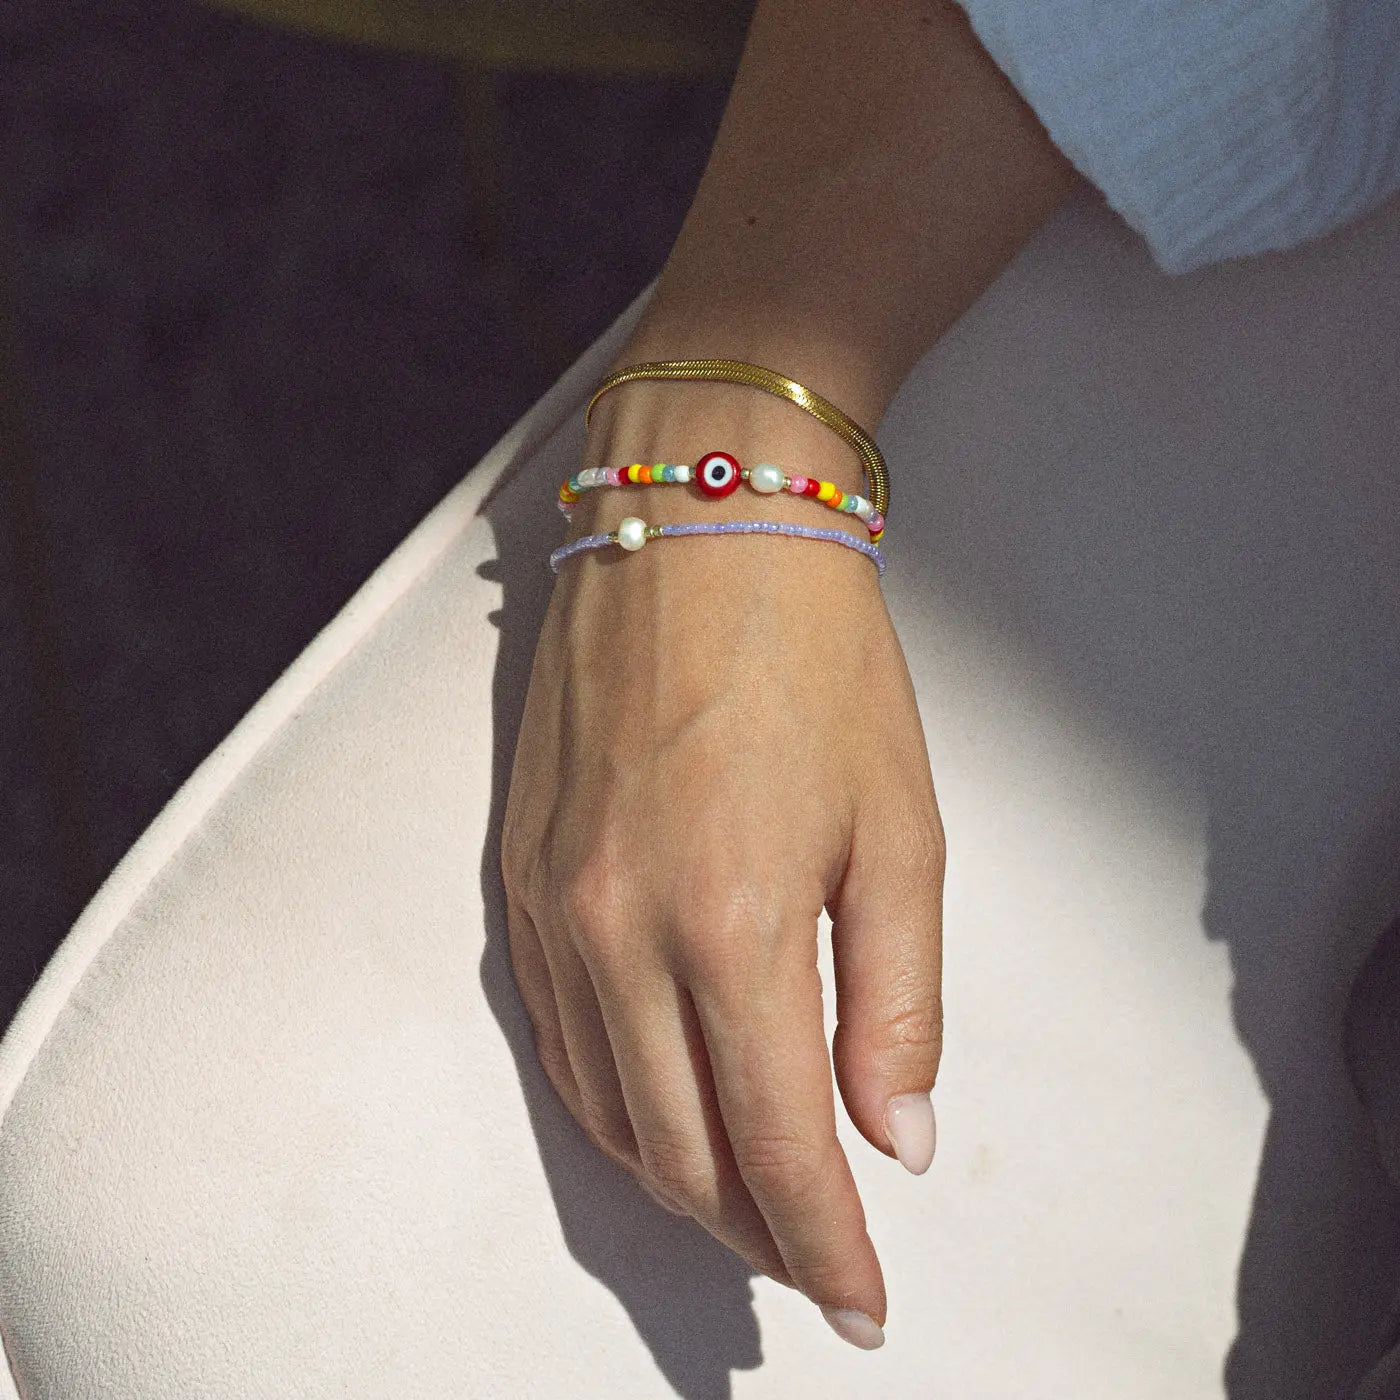 Suzy - Evil Eye Colourful Bead and Pearl Bracelet